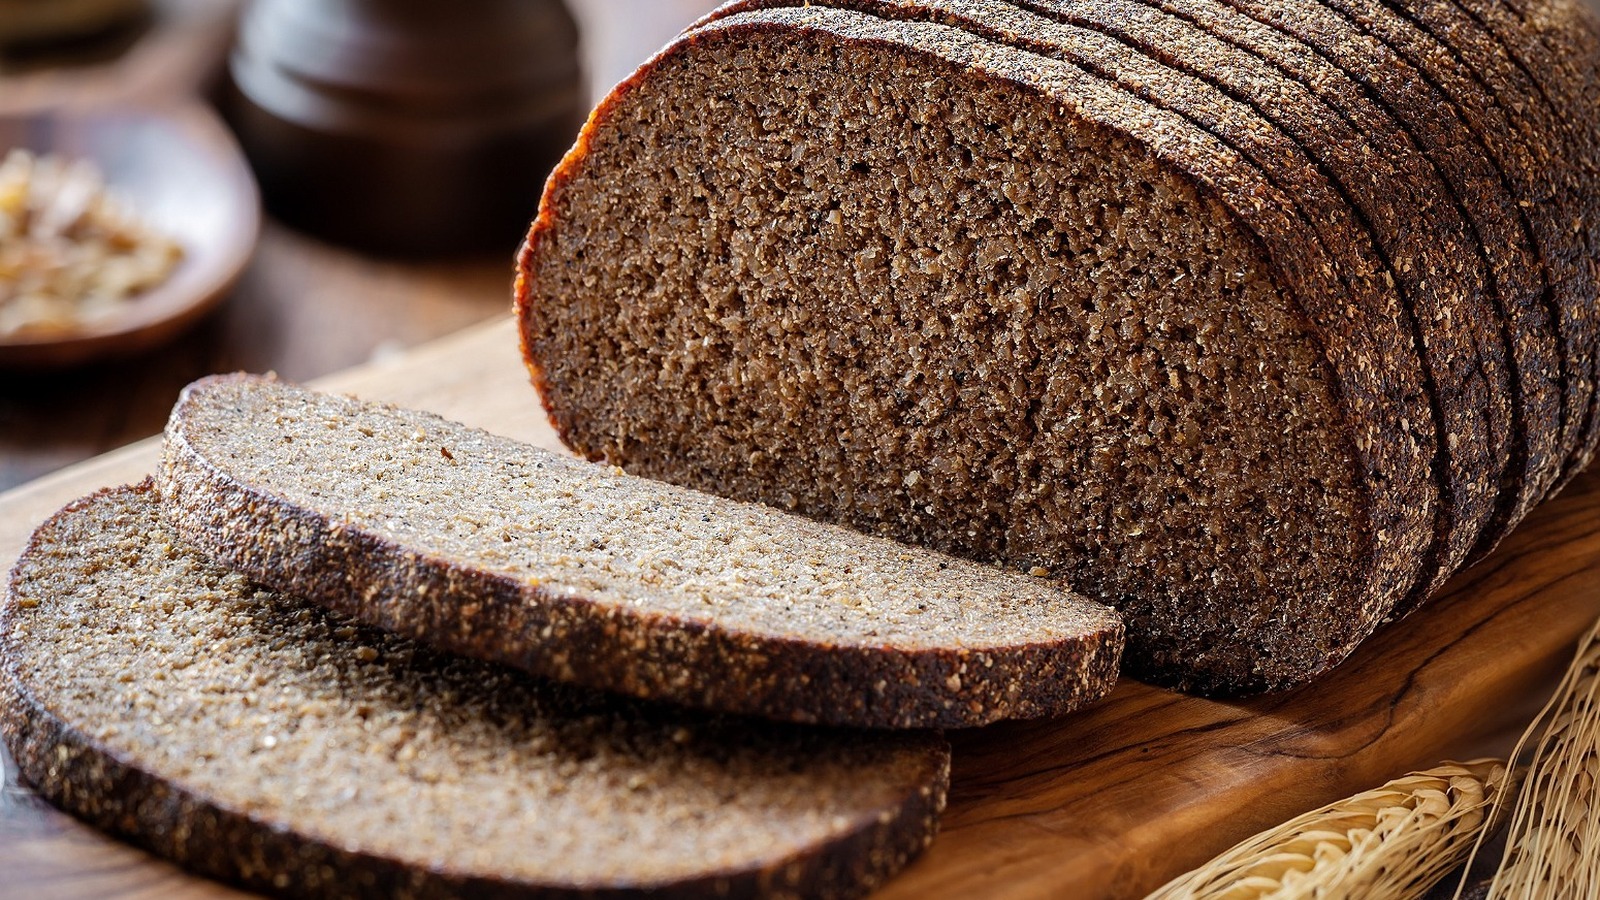 https://www.mashed.com/img/gallery/what-is-rye-bread-and-is-it-nutritious/l-intro-1645922315.jpg